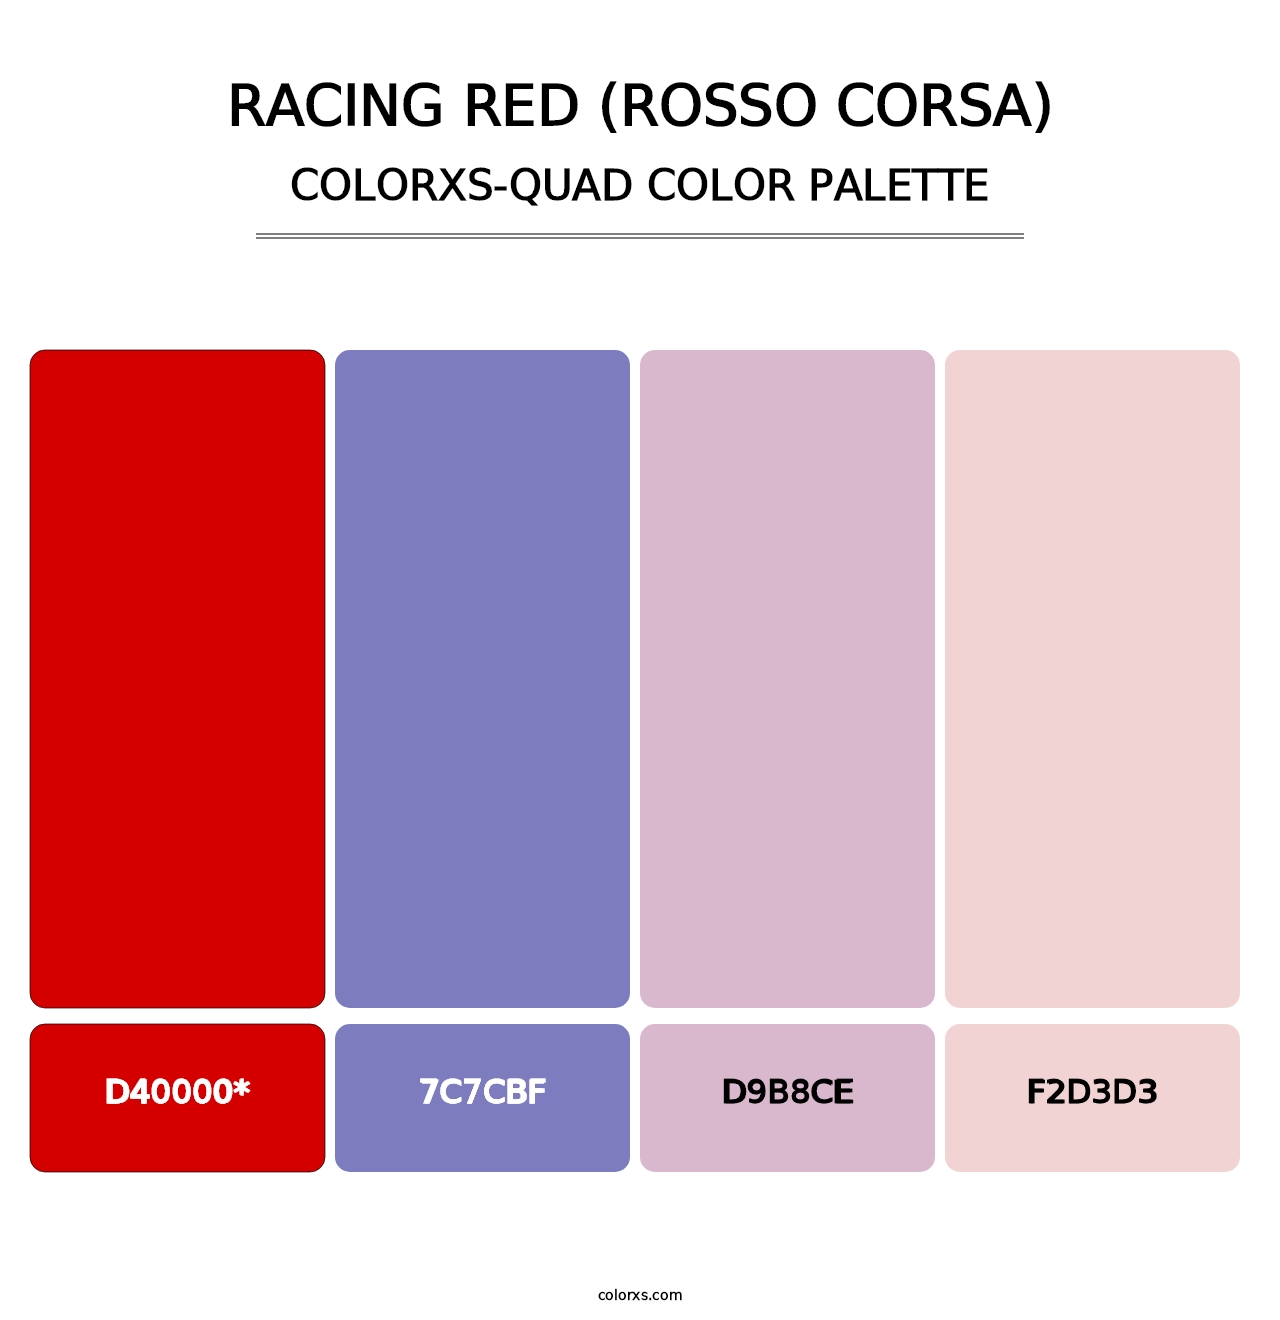 Racing Red (Rosso Corsa) - Colorxs Quad Palette